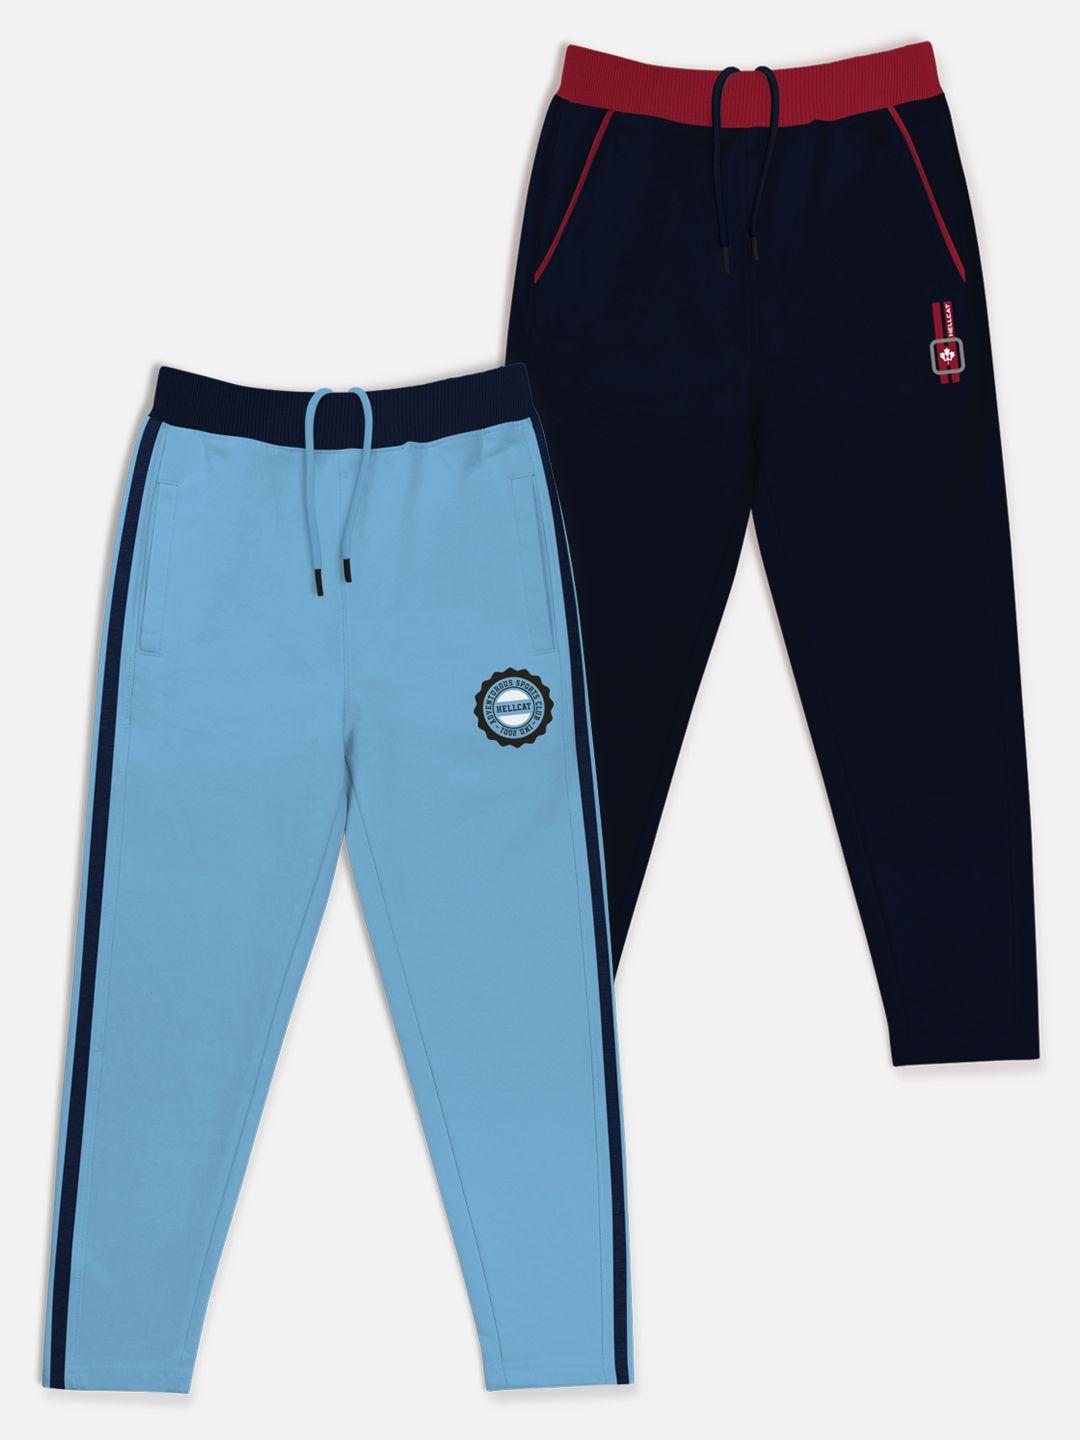 hellcat-boys-pack-of-2-solid-track-pants